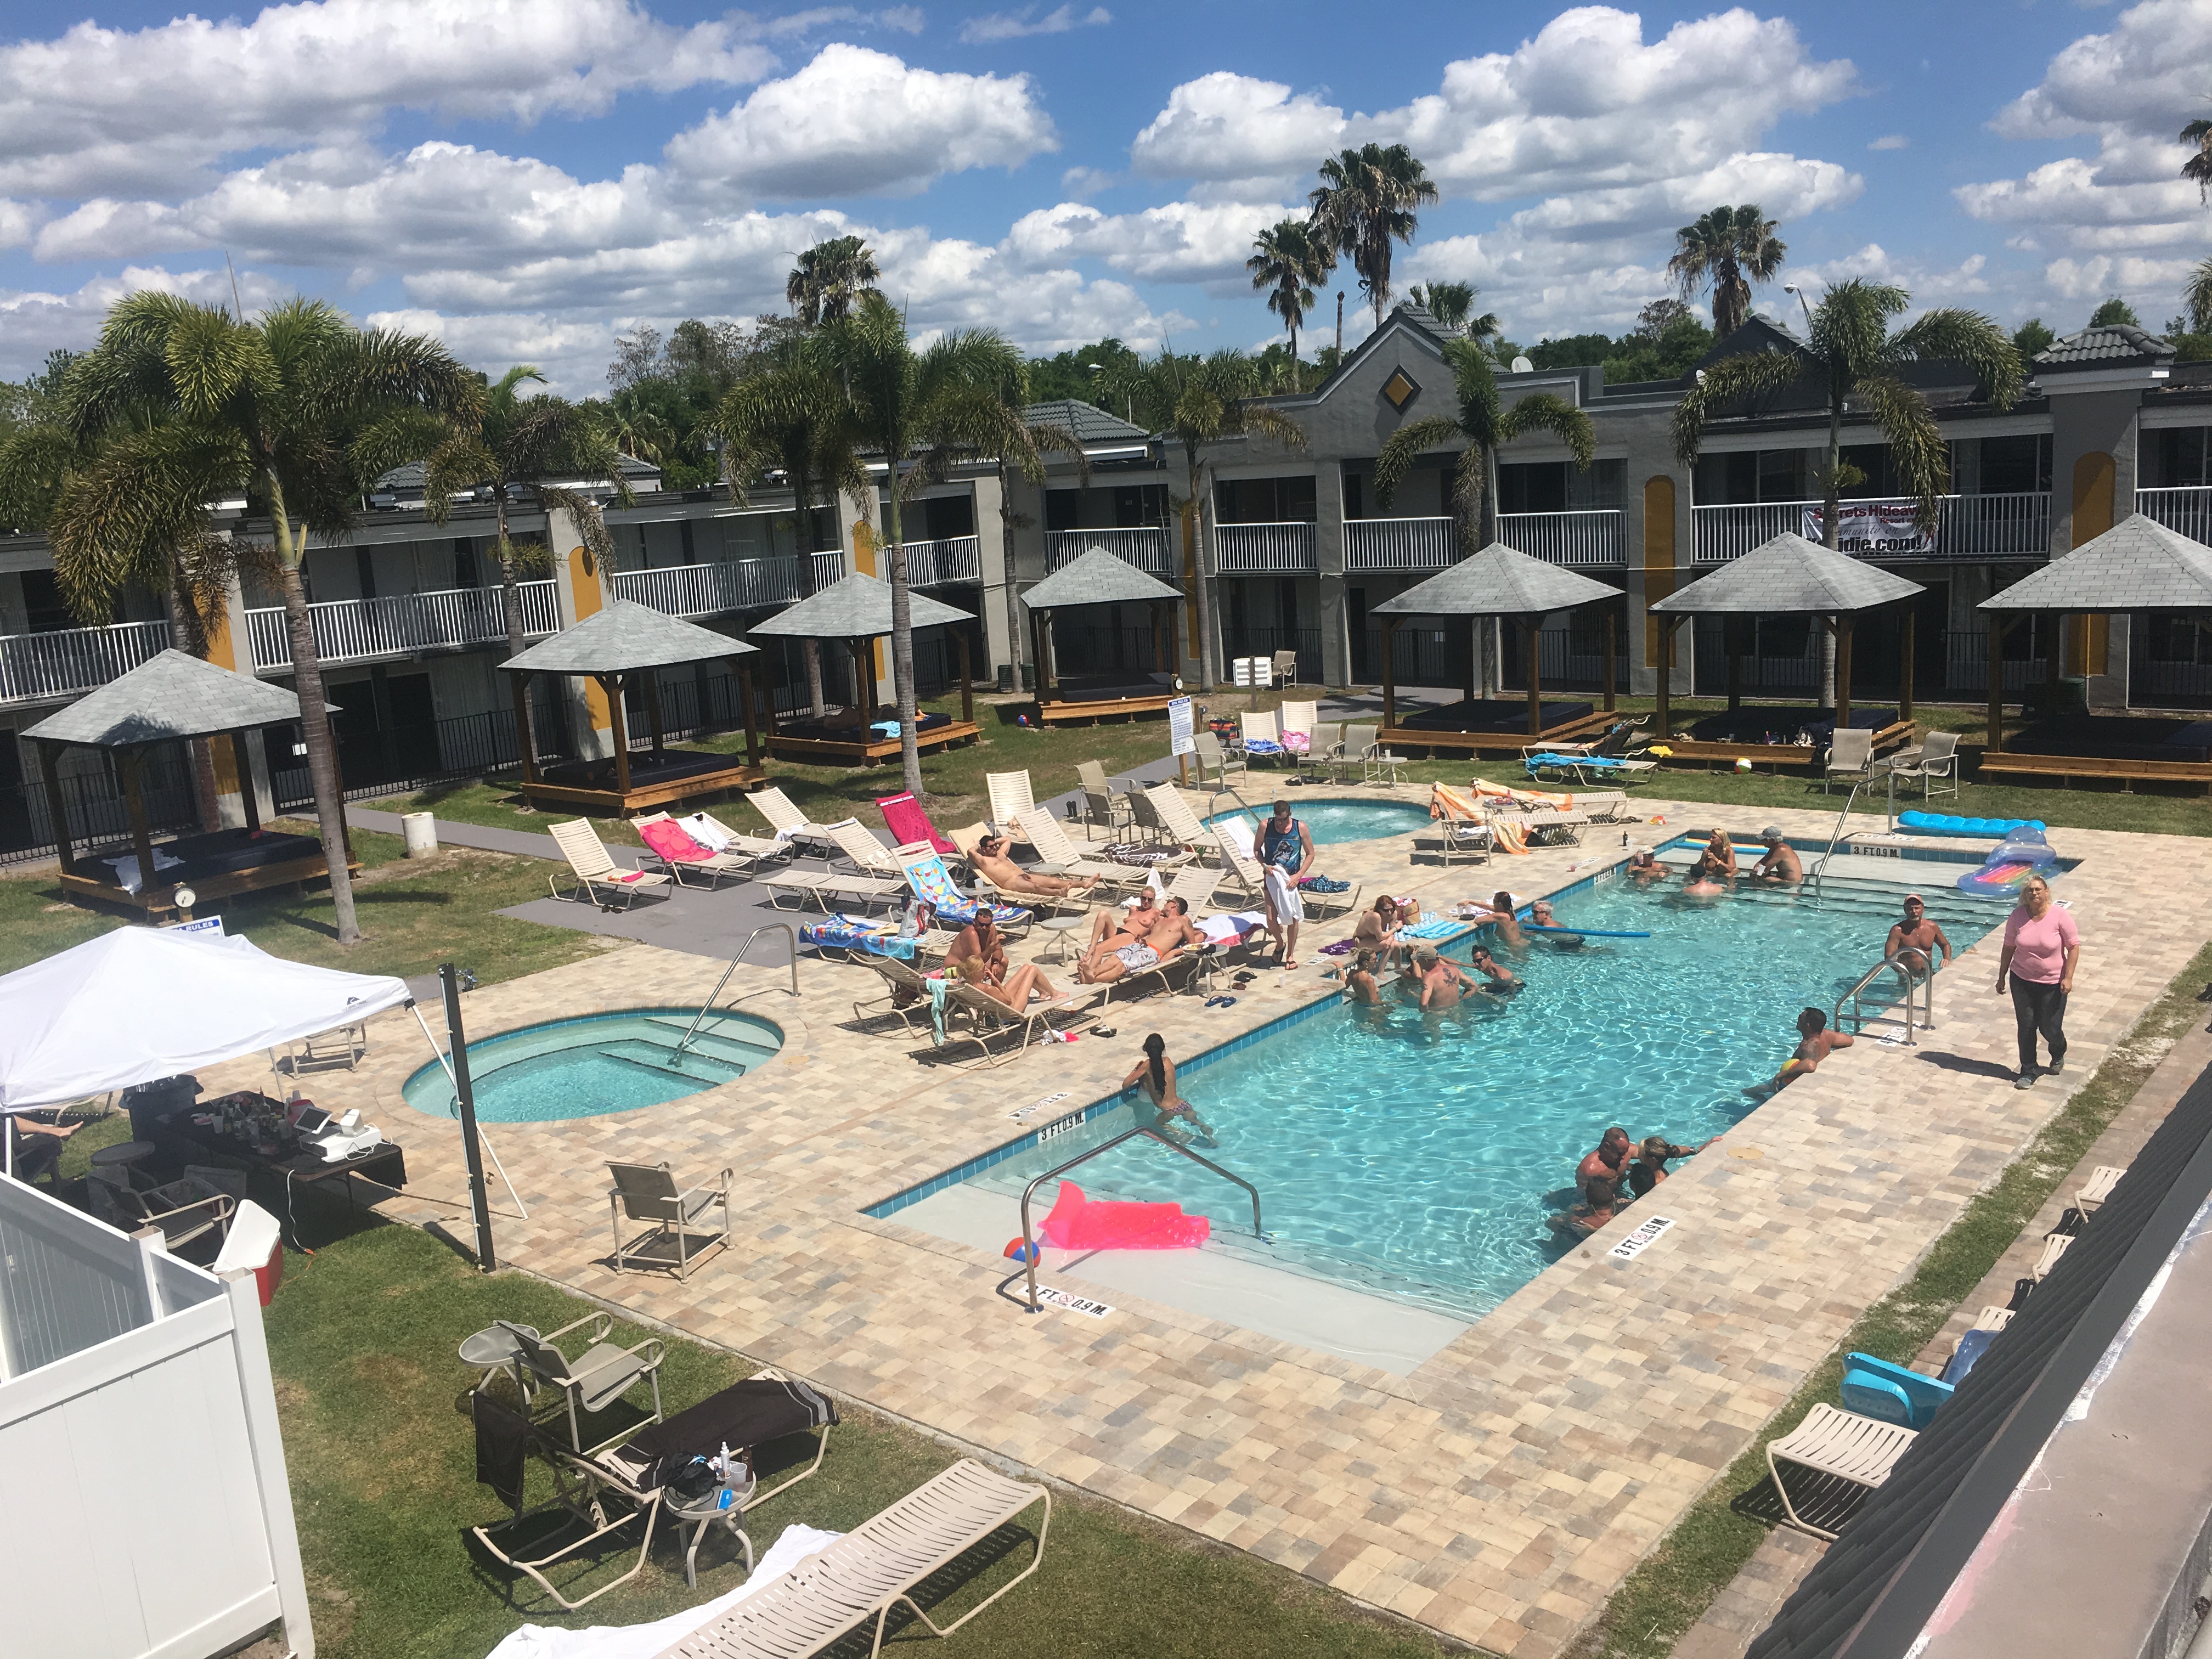 Secrets Hideaway Resort, Florida Lifestyle Condo Hotel, from $39,900 picture